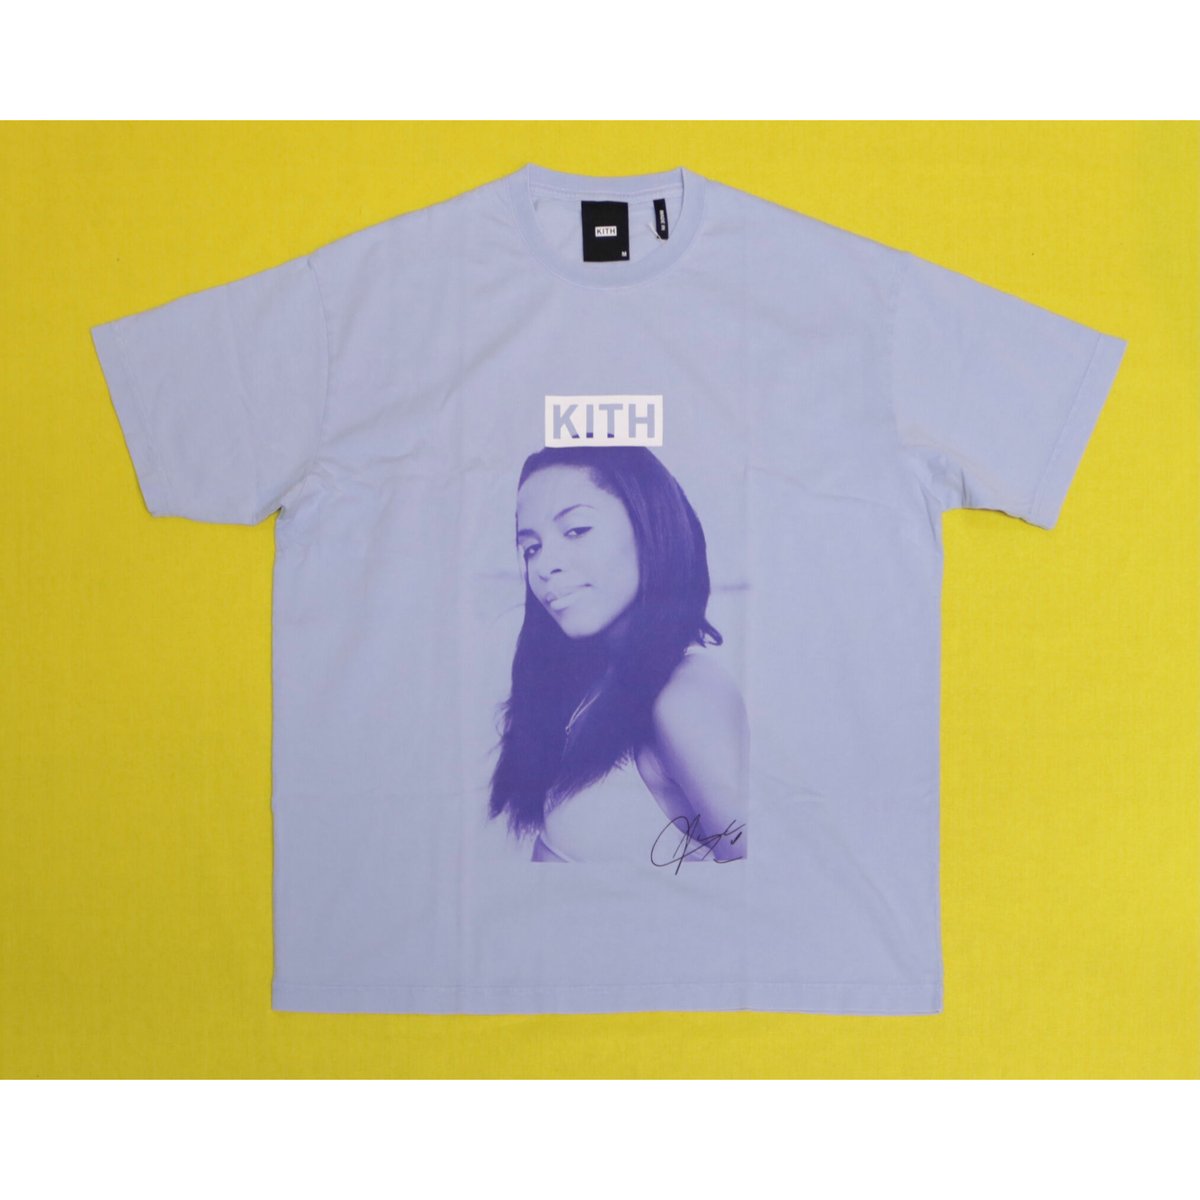 KITH x RW x AALIYAH BACK & FORCE VINTAGE T Avalanche Size M